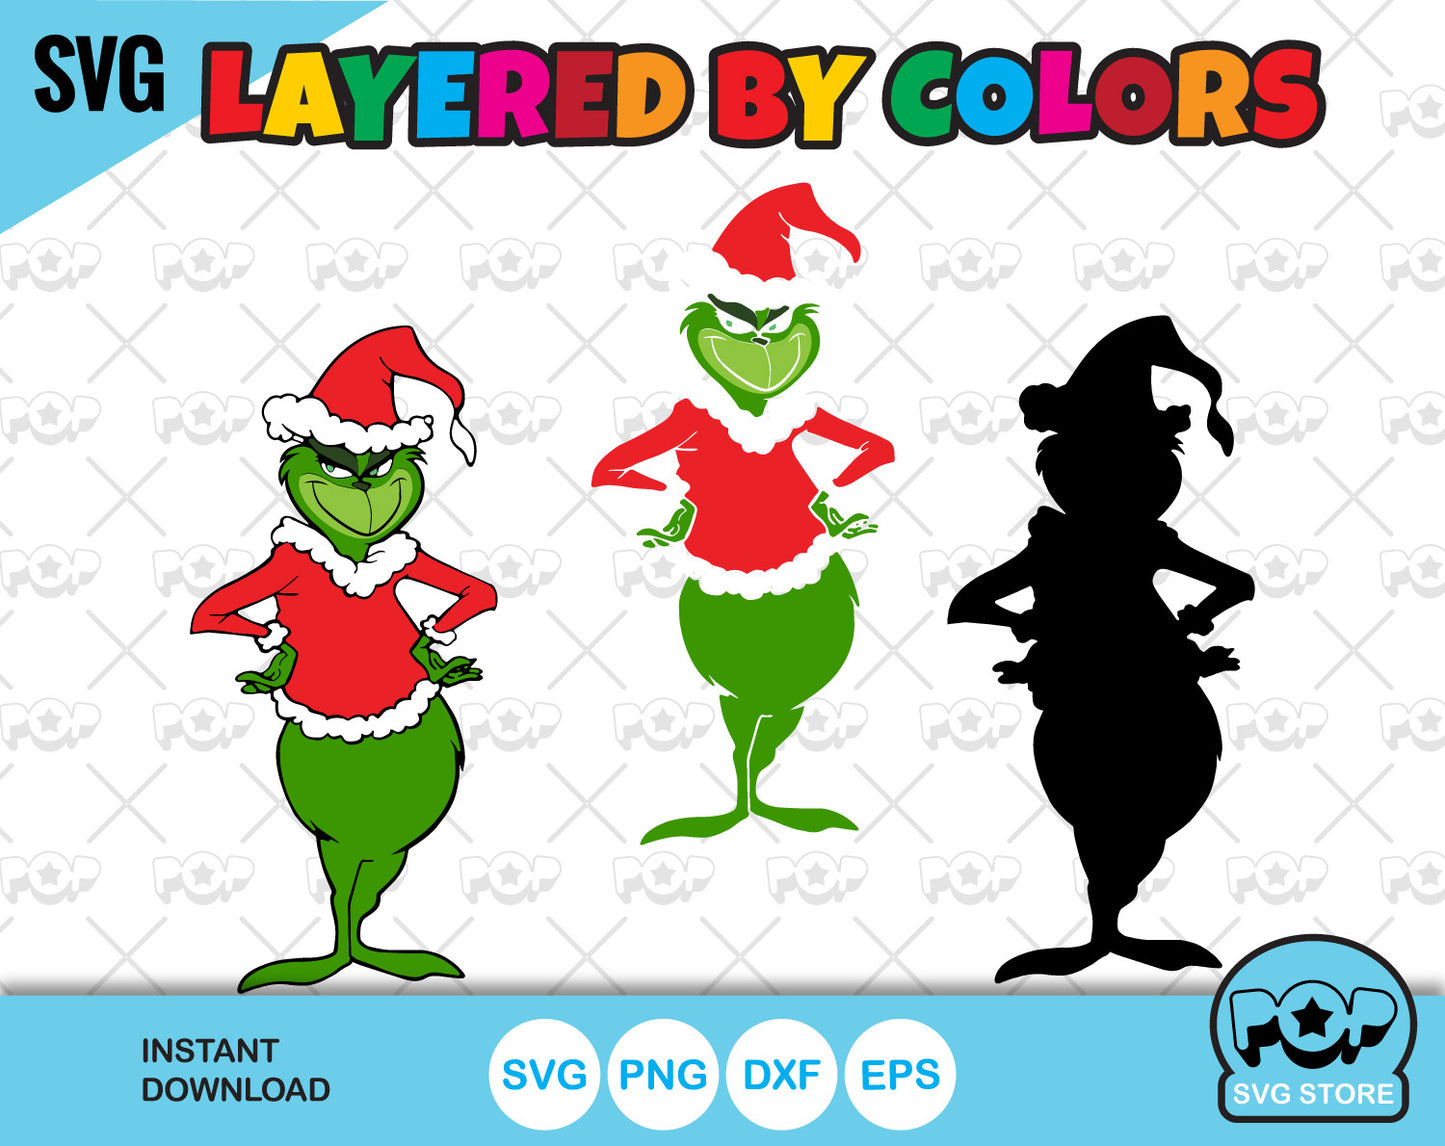 The Grinch 500+ cliparts bundle, Grinch Christmas SVG cut files for Cricut / Silhouette, Christmas cliparts, instant download